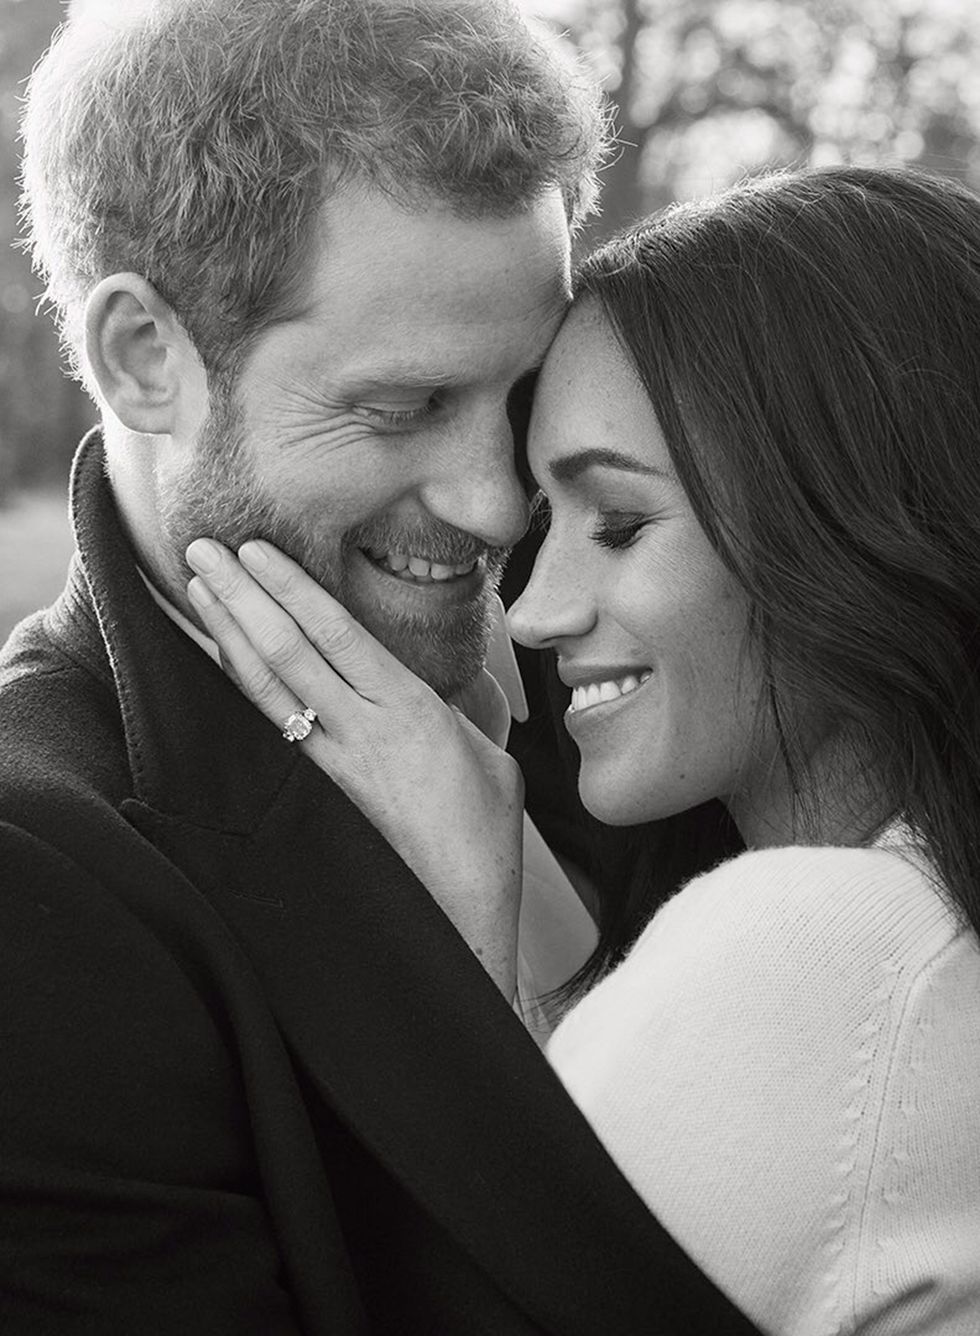 Prince Harry and Meghan Markle's engagement photos